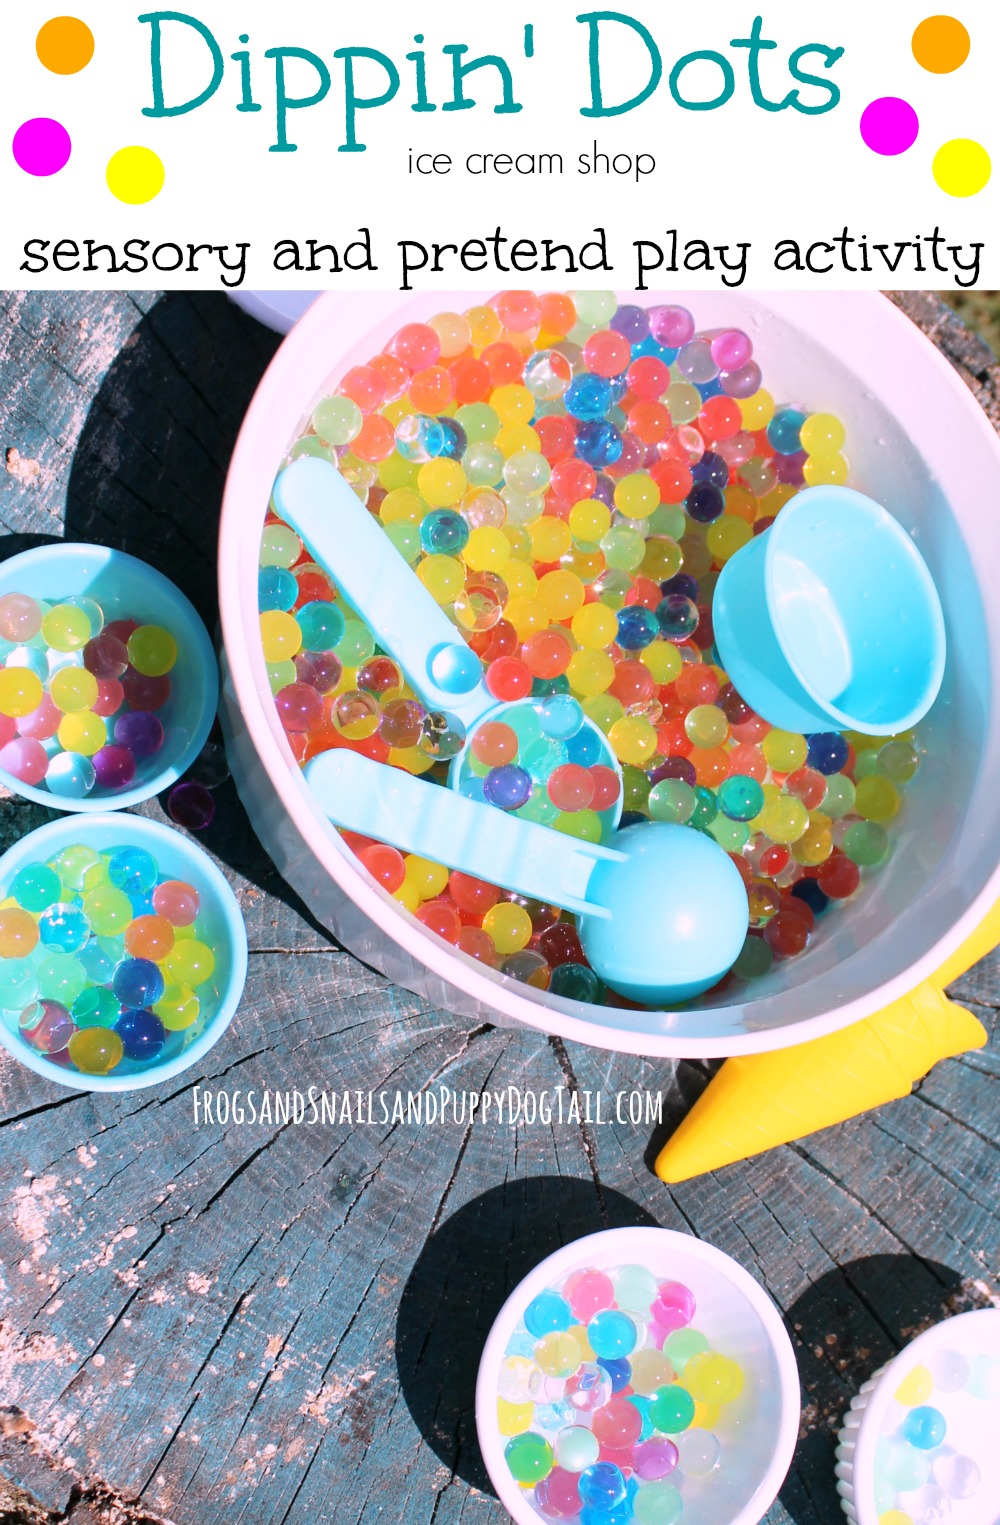 Dippin' Dots Ice Cream Shop Sensory Play - FSPDT